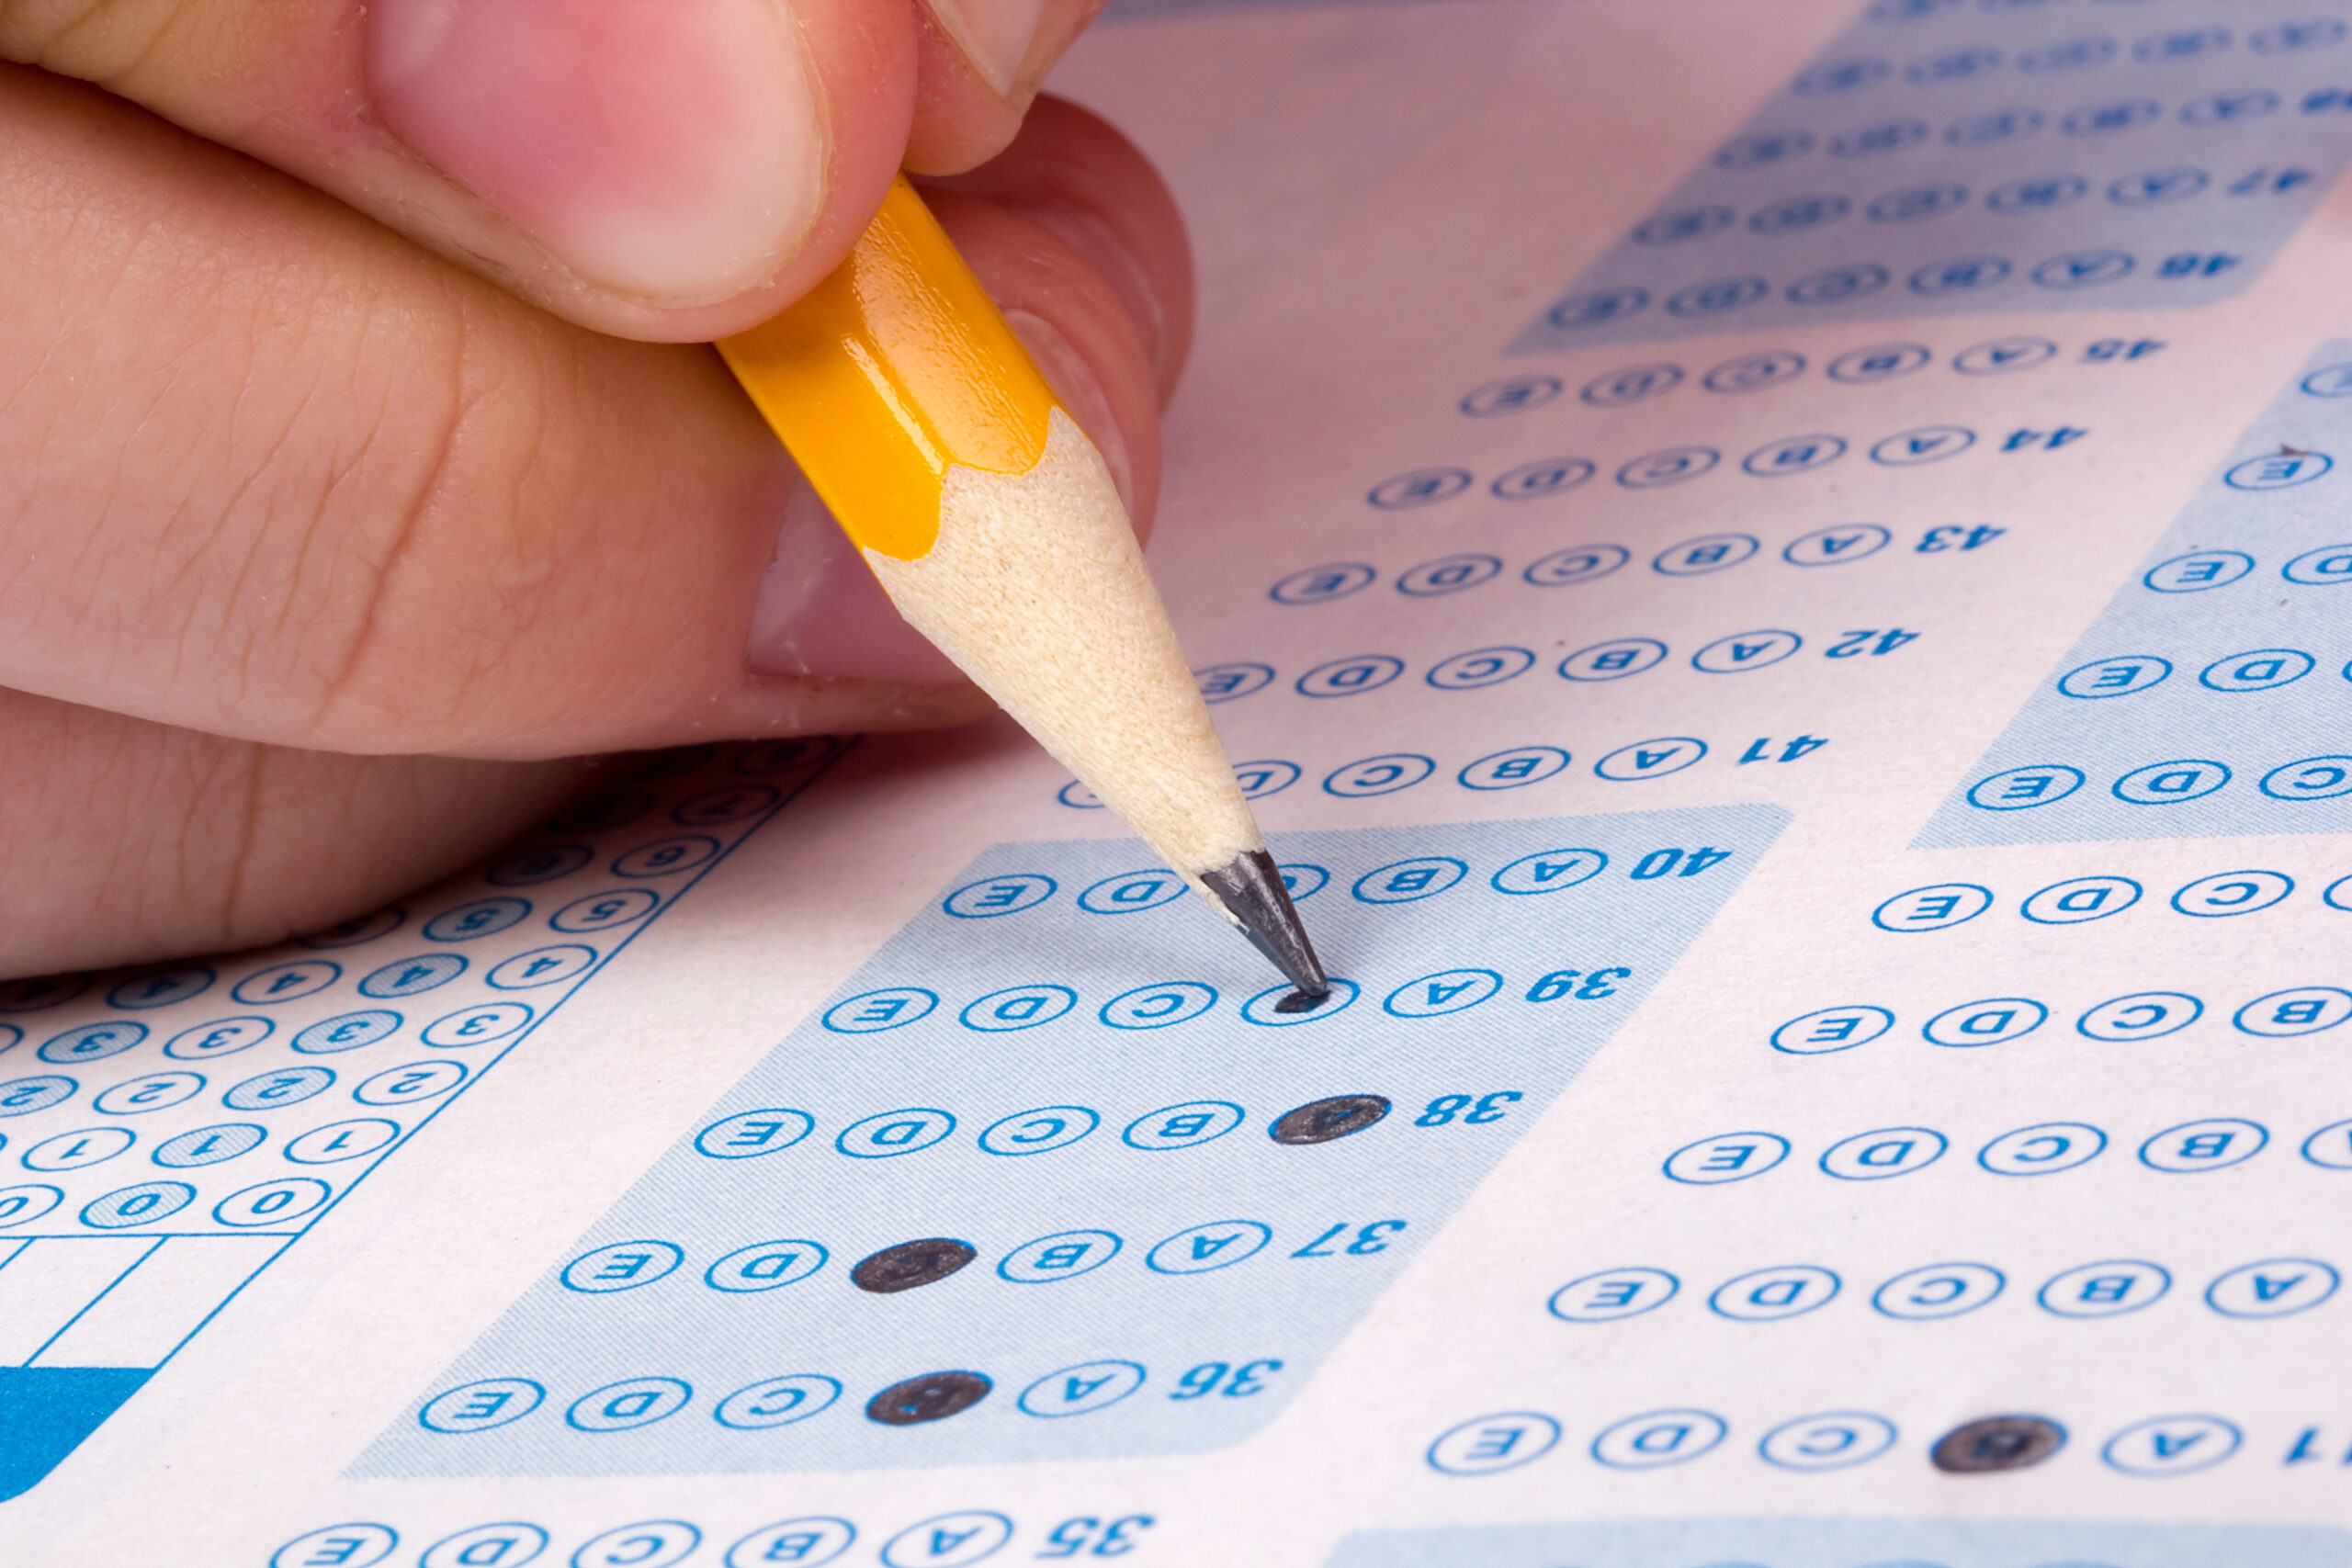 Test Anxiety and the Impact On Performance